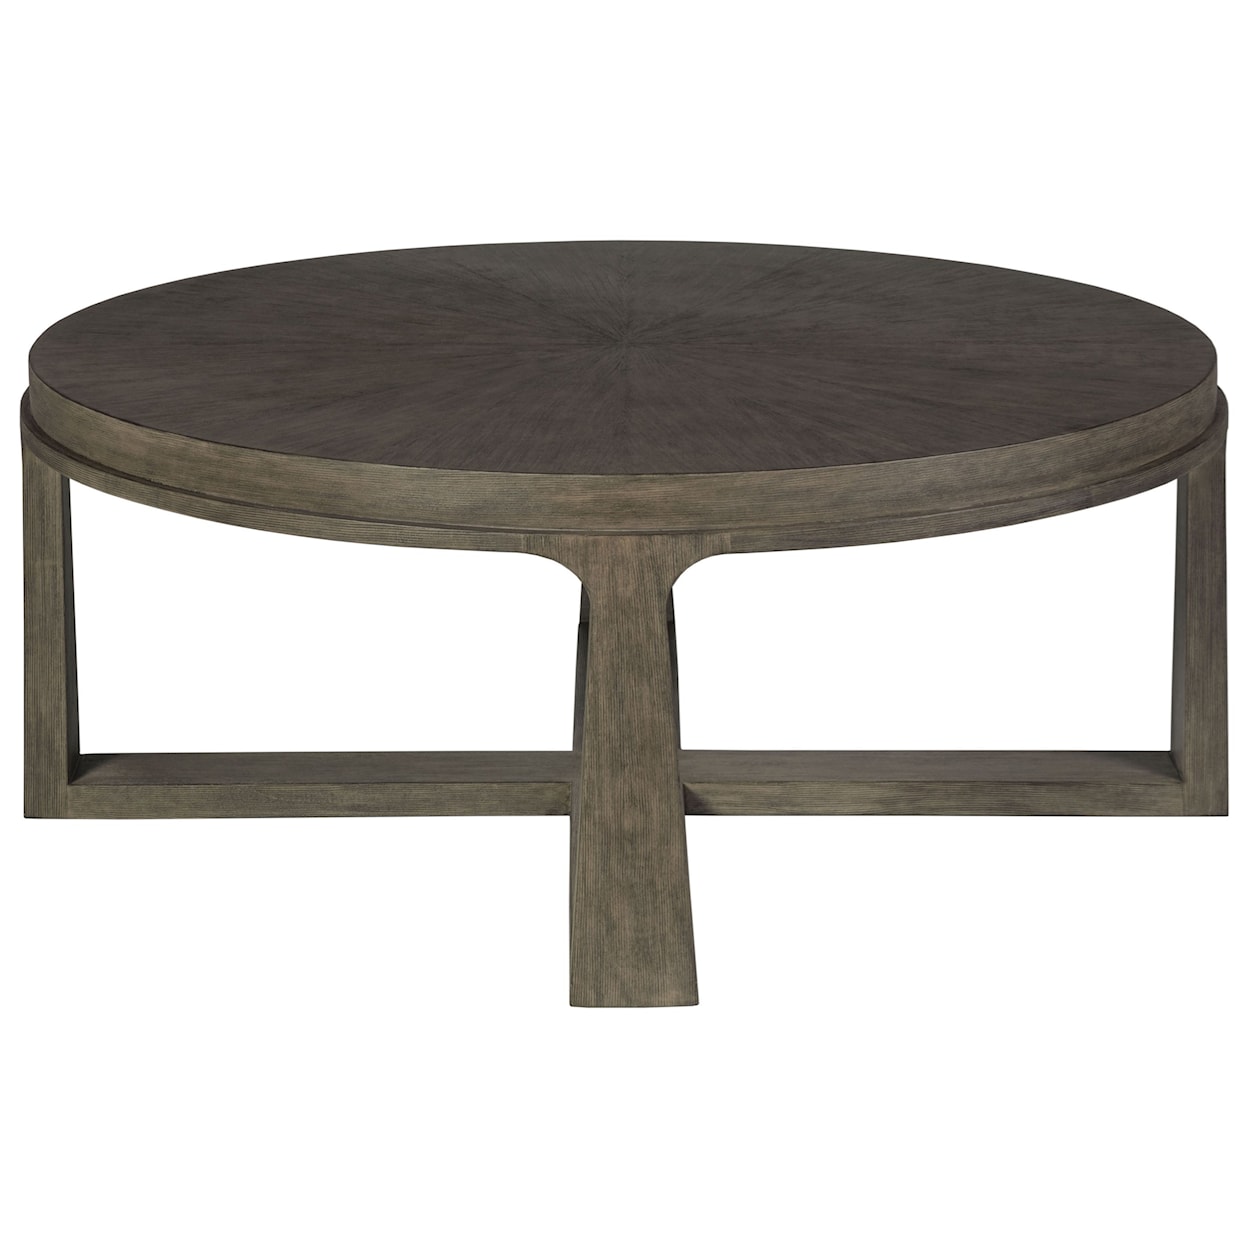 Artistica Cohesion Rousseau Round Cocktail Table